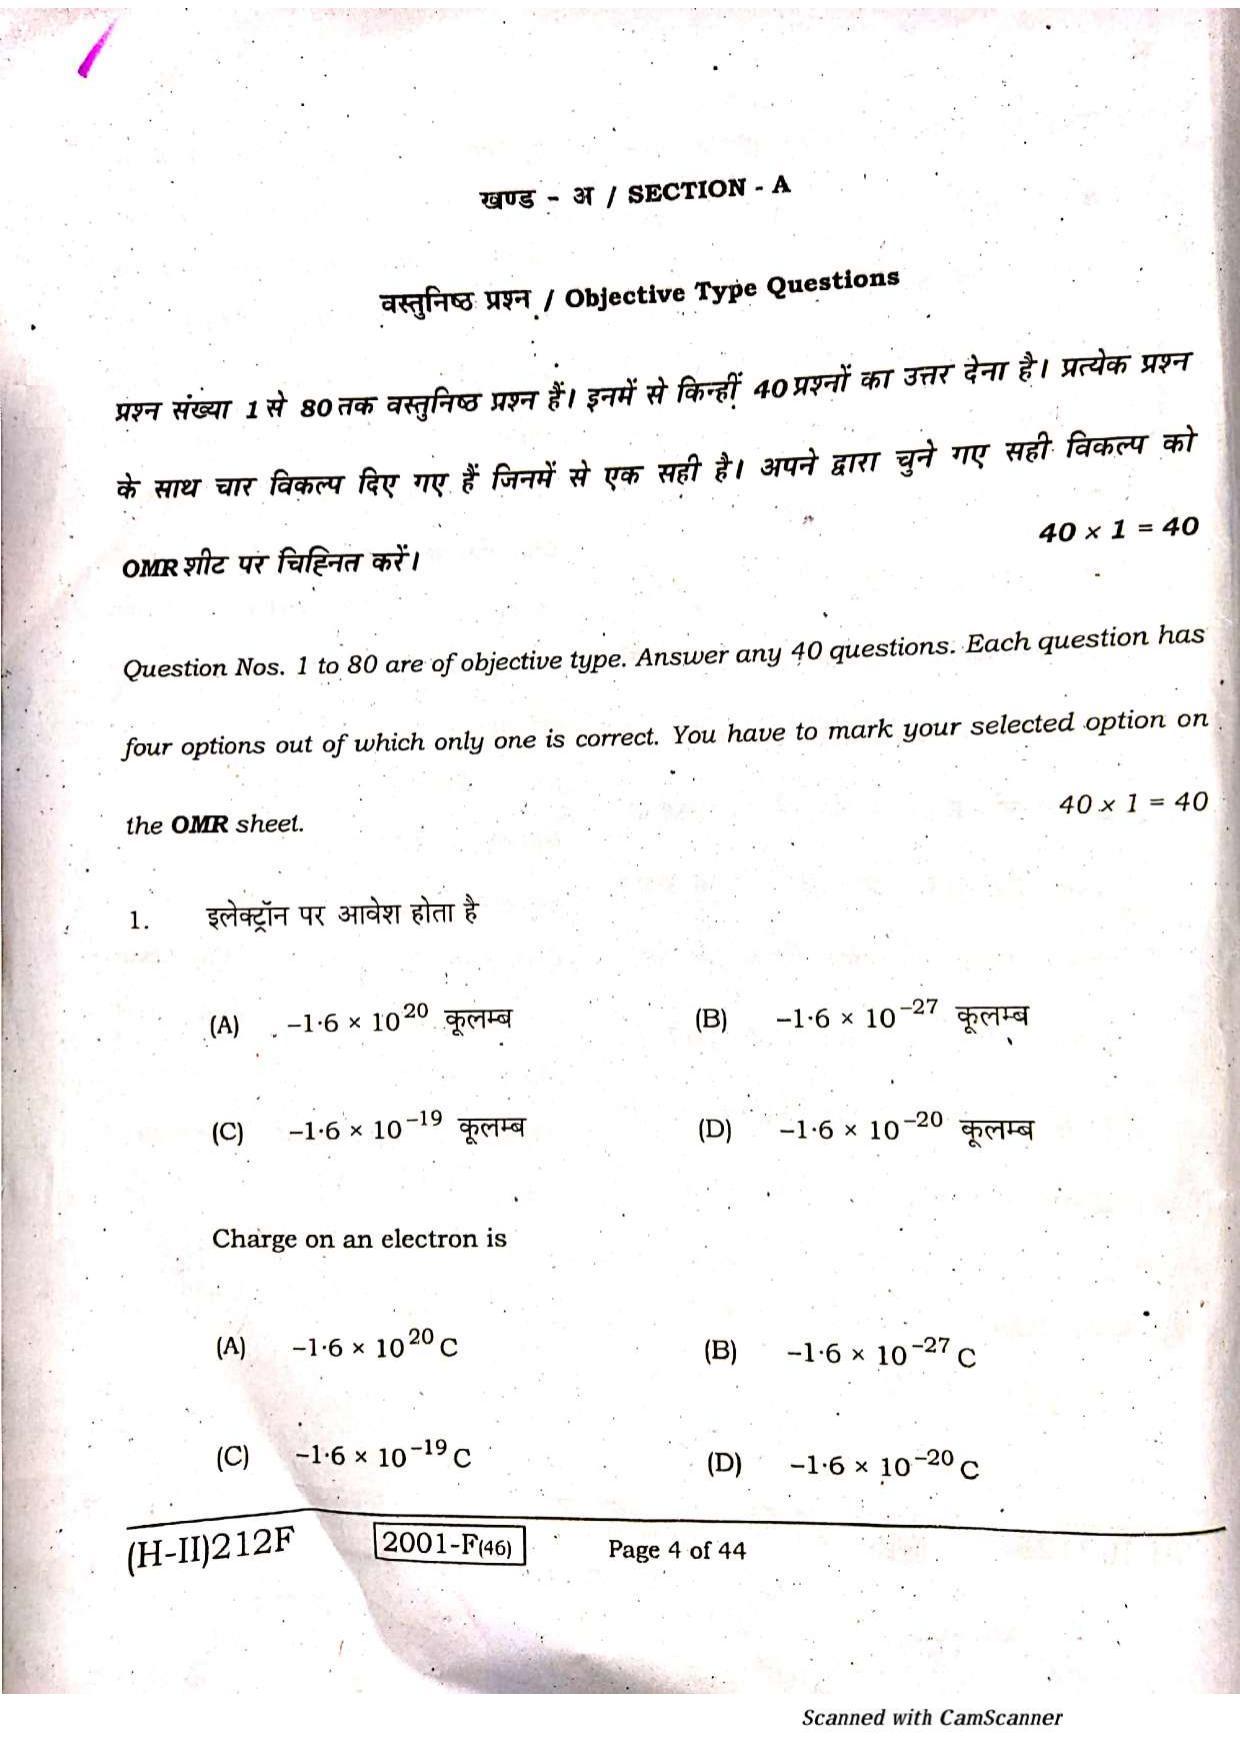 Bihar Board Class 10 Science 2021 (2nd Sitting) Question Paper - Page 2